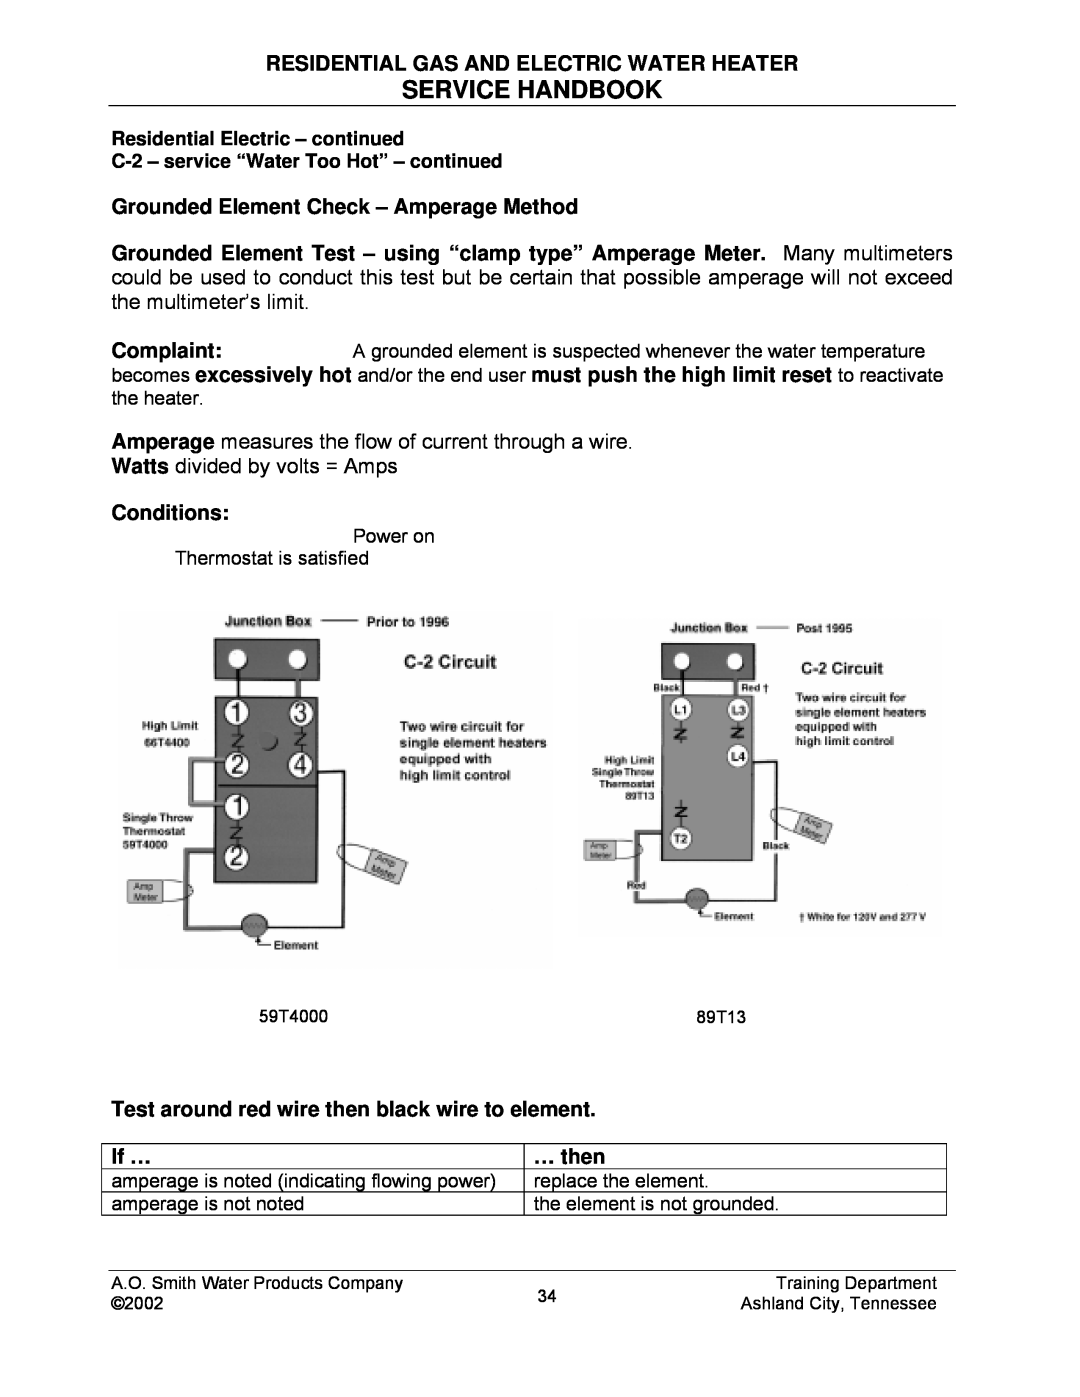 A.O. Smith TC-049-R2 Service Handbook, Residential Gas And Electric Water Heater, Grounded Element Check - Amperage Method 